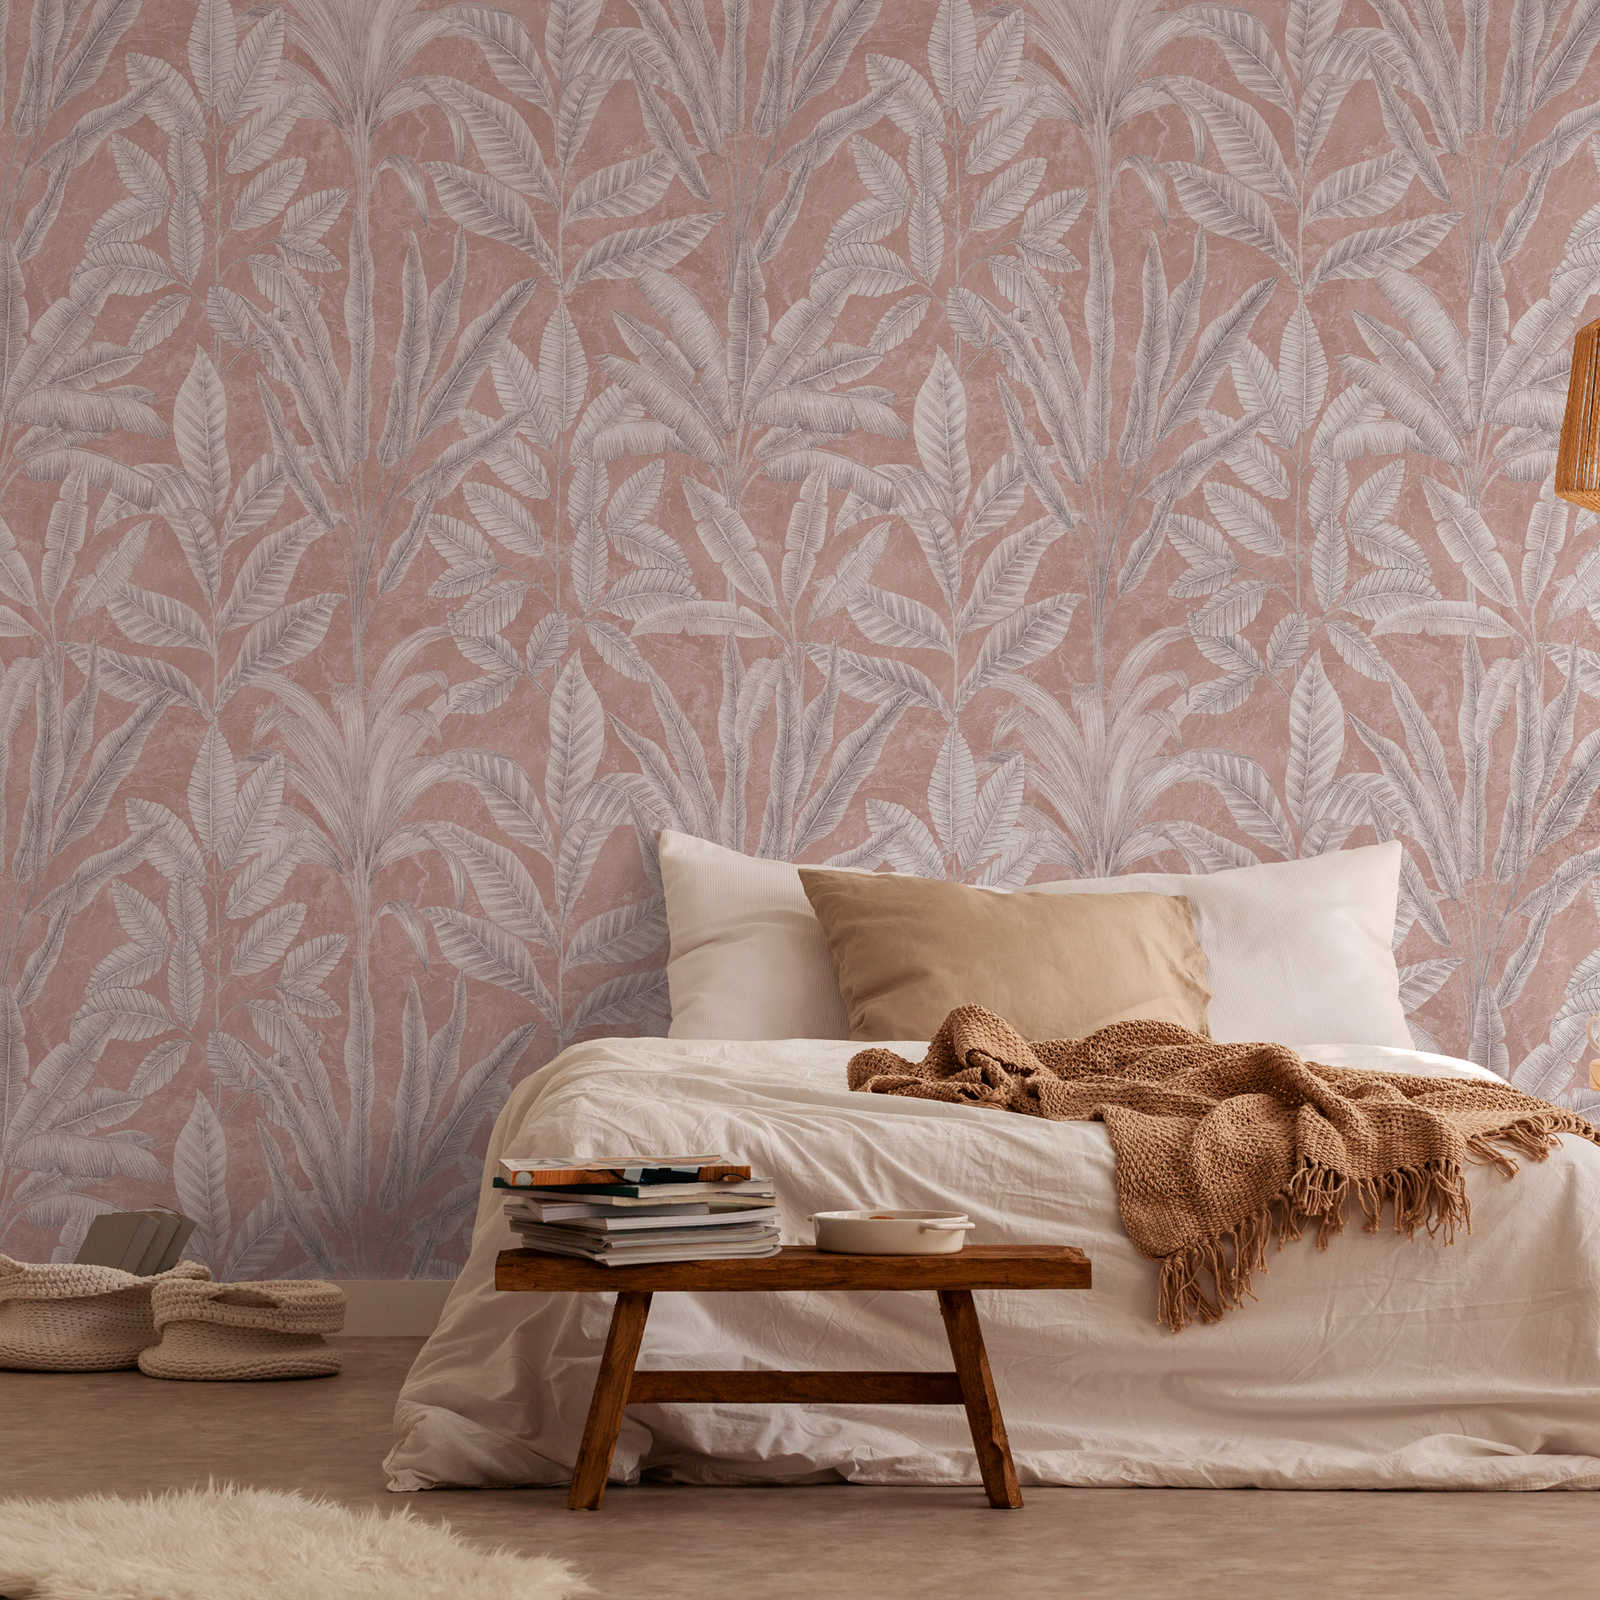 Non-woven wallpaper with large leaves in light colours - pink, grey, white
